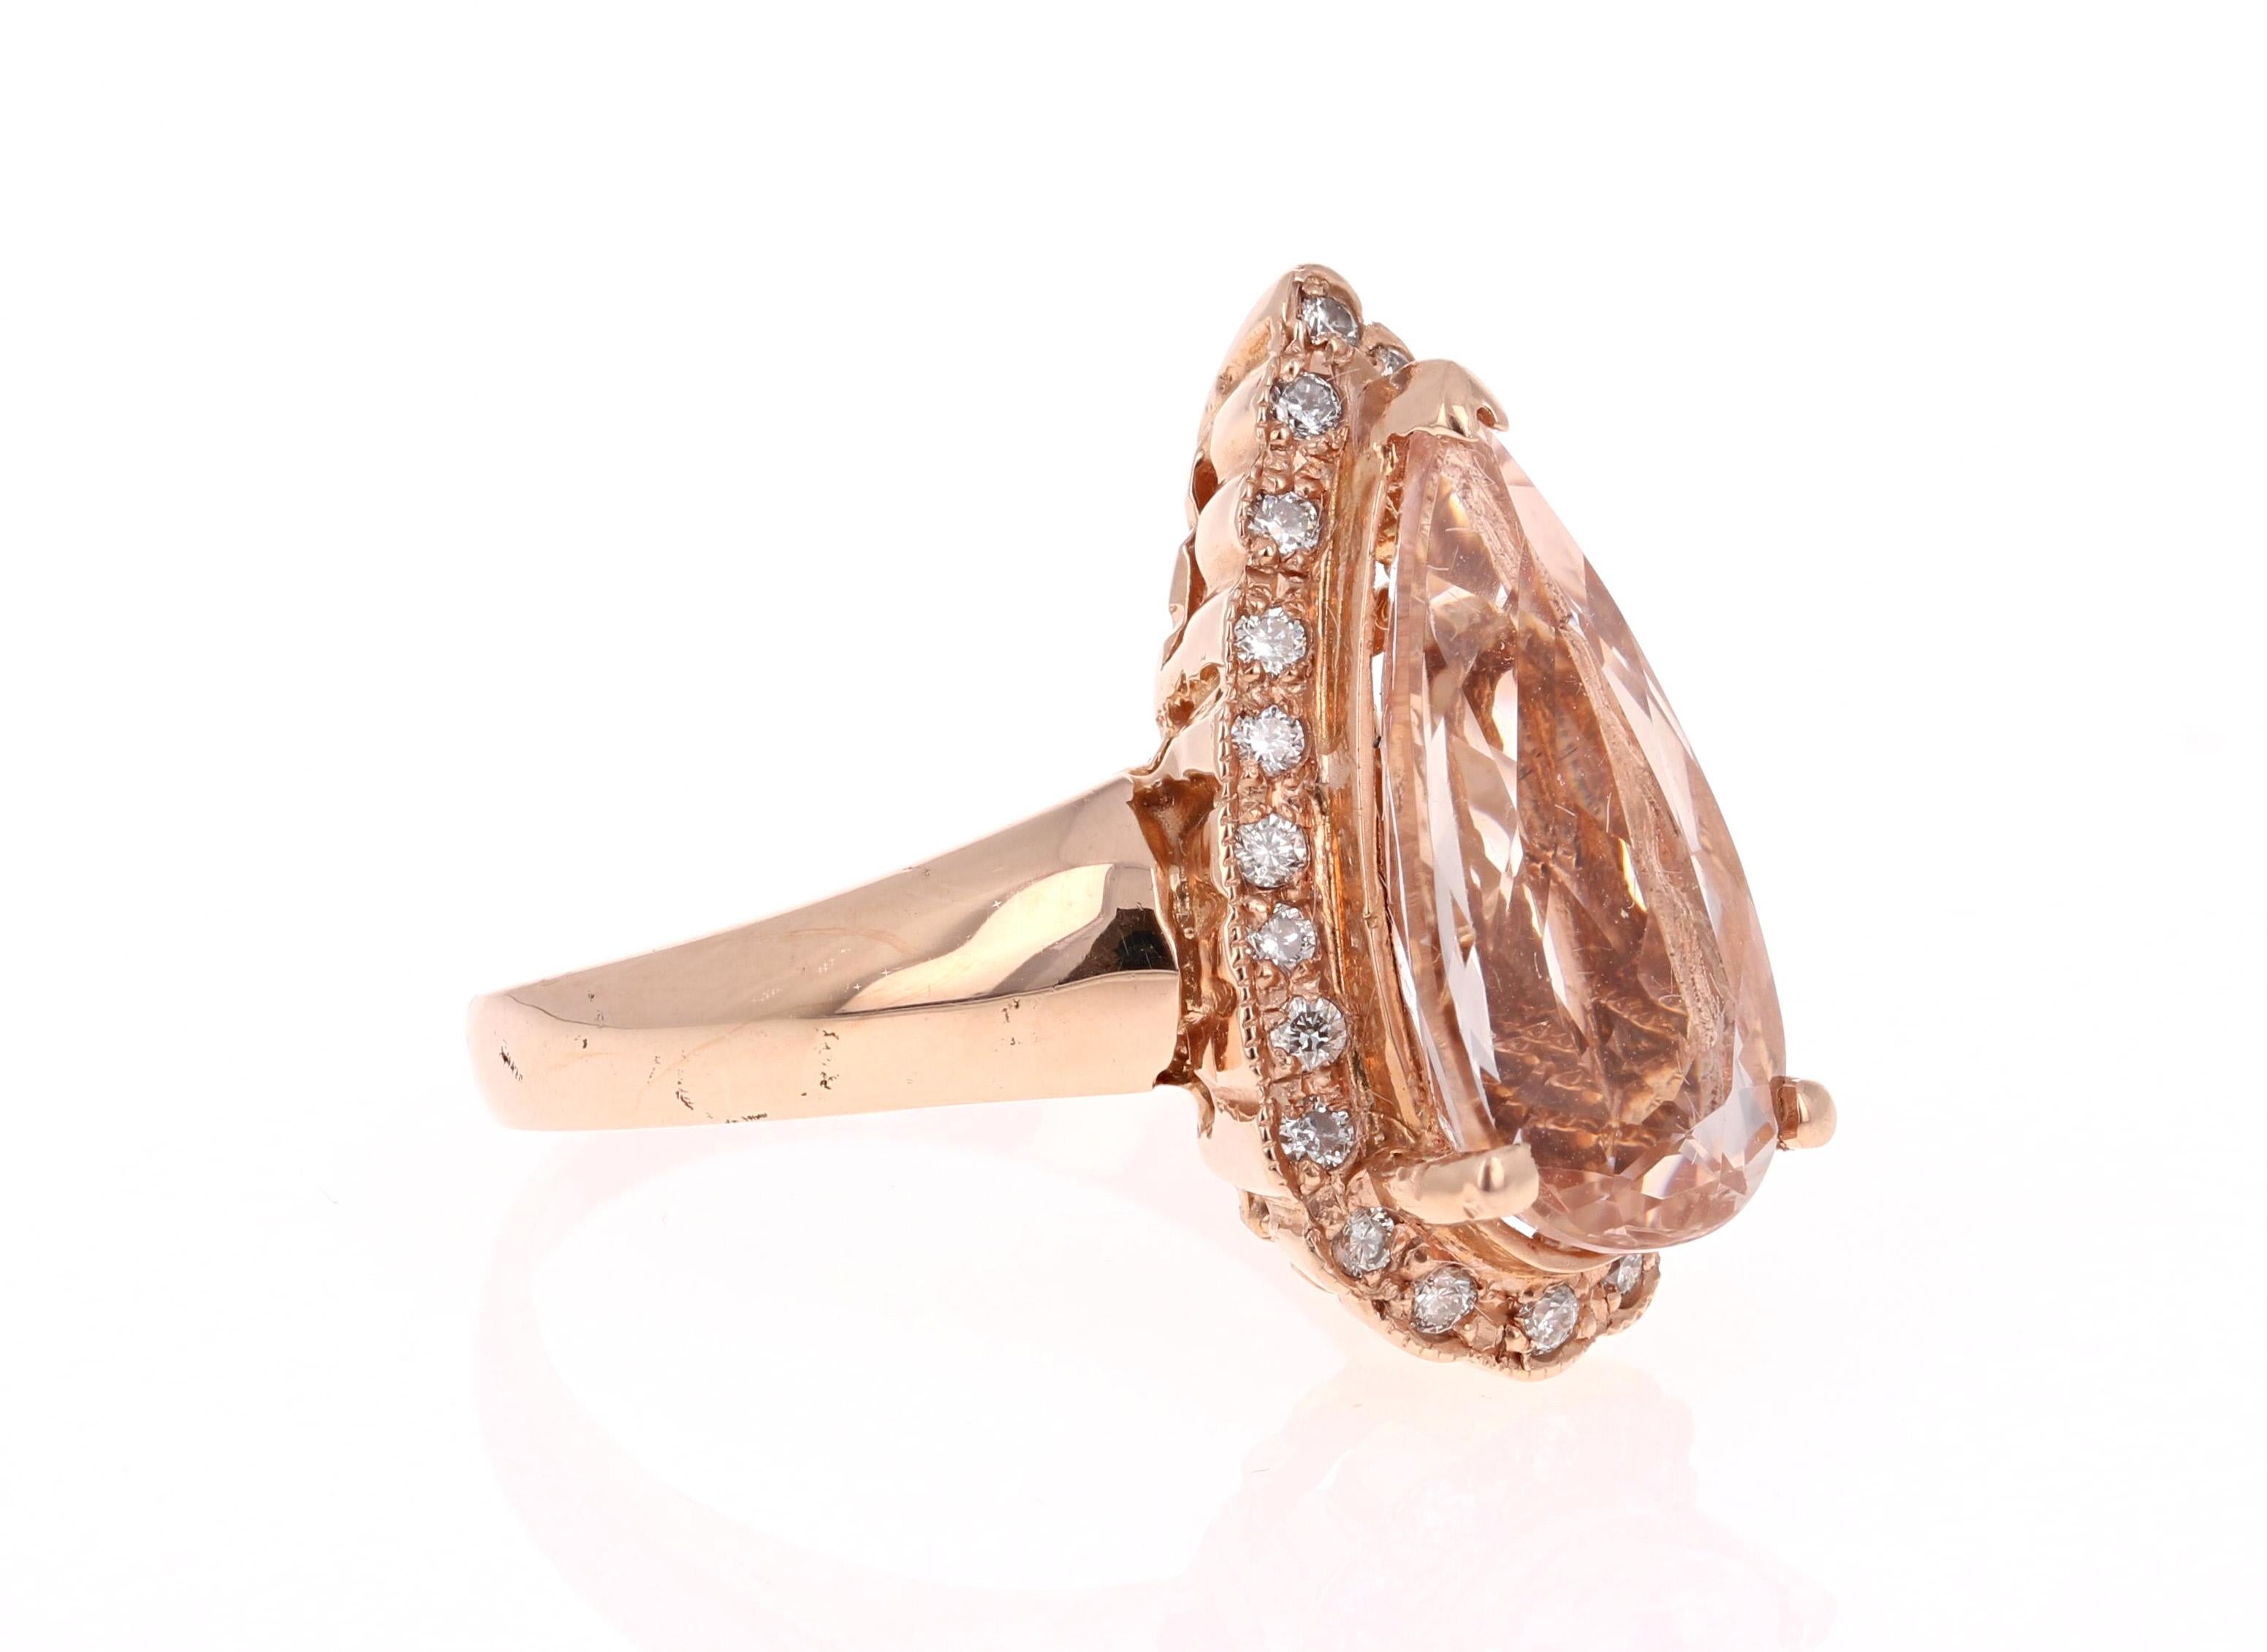 This gorgeous and classy Morganite Ring can easily substitute for a unique and edgy Engagement or Promise ring for that special someone. Or a stunning and unique Cocktail Ring for those fancy nights out! 

It has a 4.41 Carat Pear Cut Morganite and